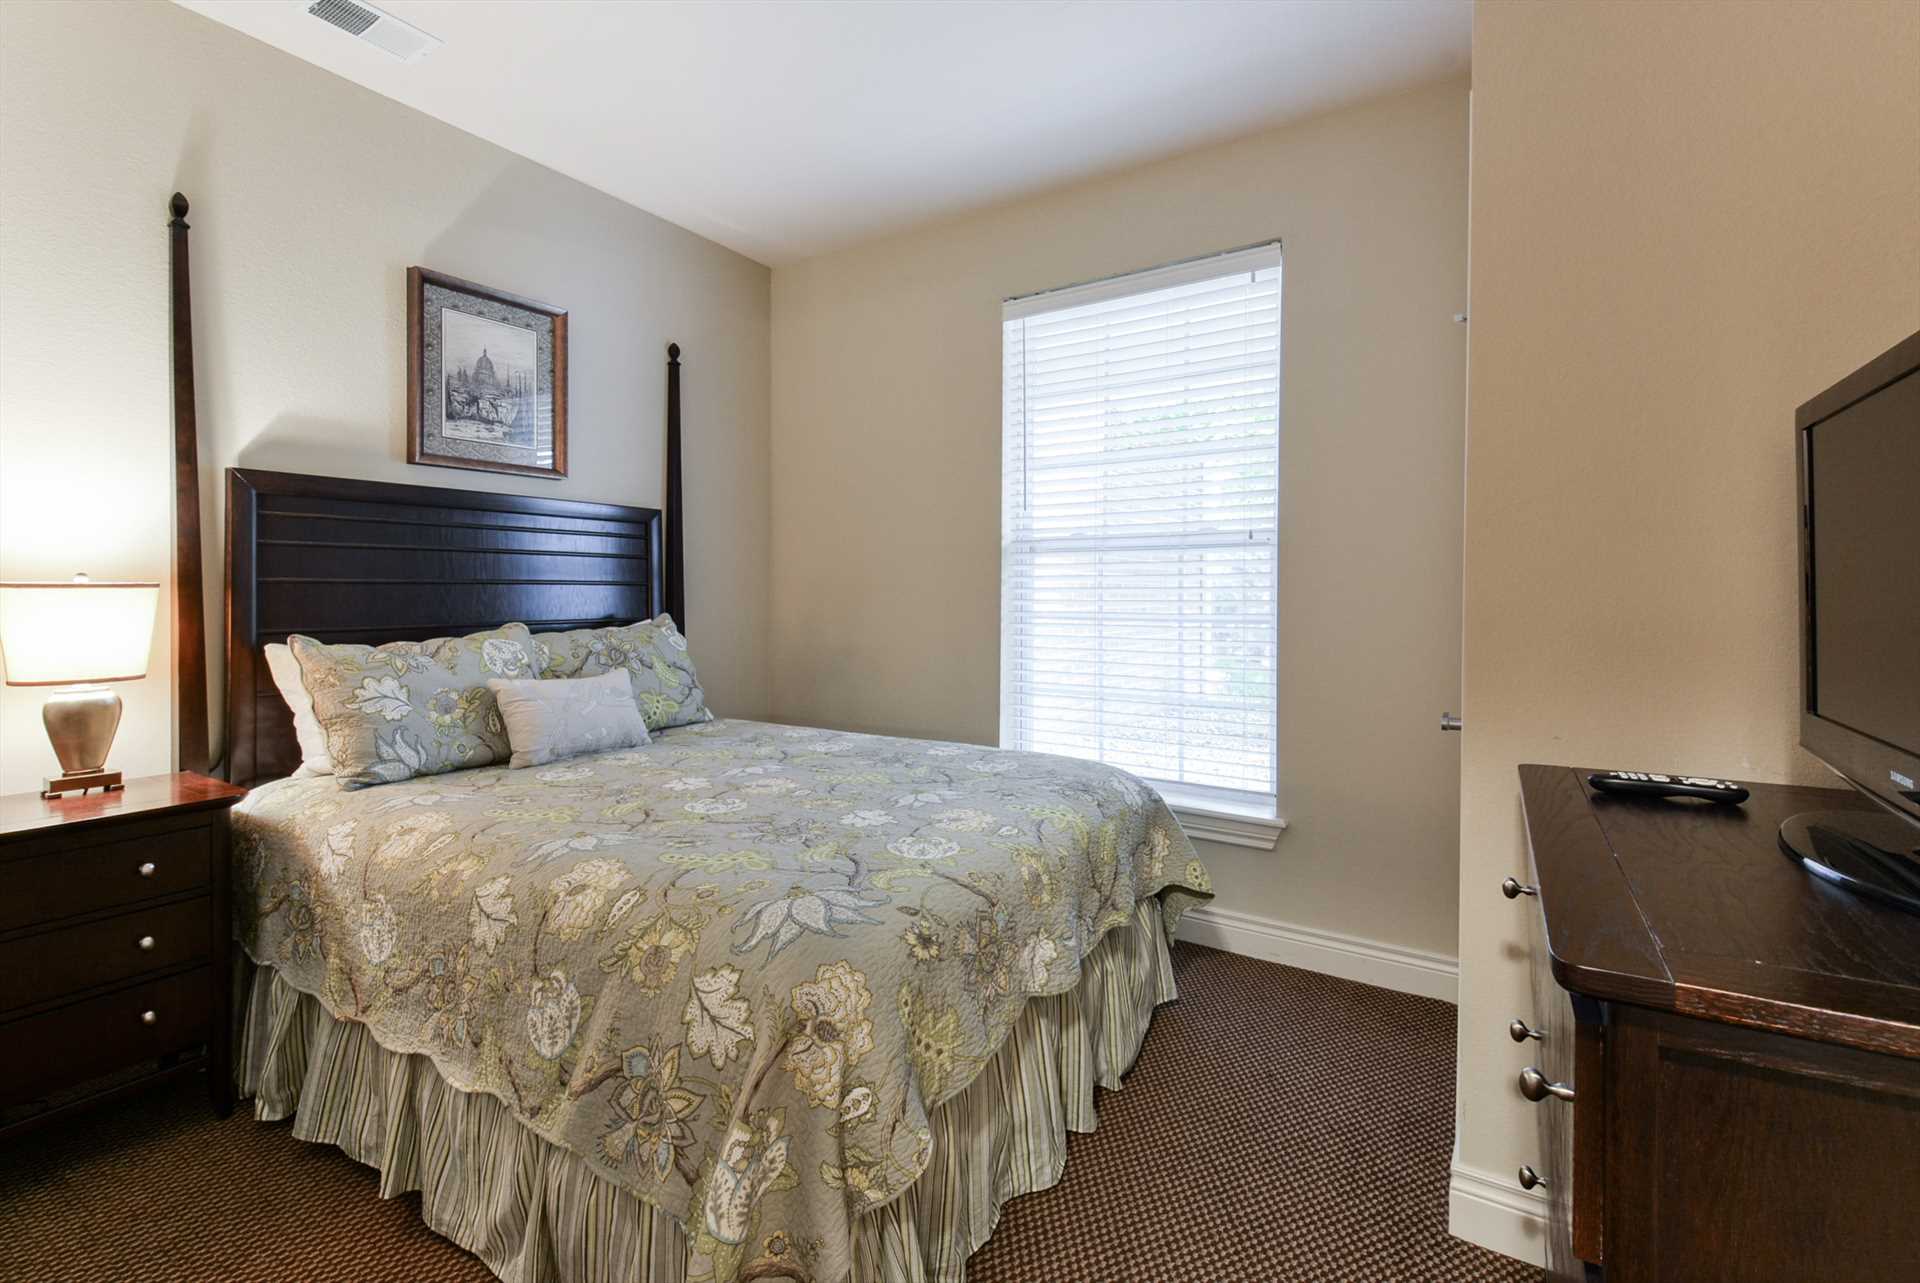 Both bedrooms include a flat screen television, so everyone 